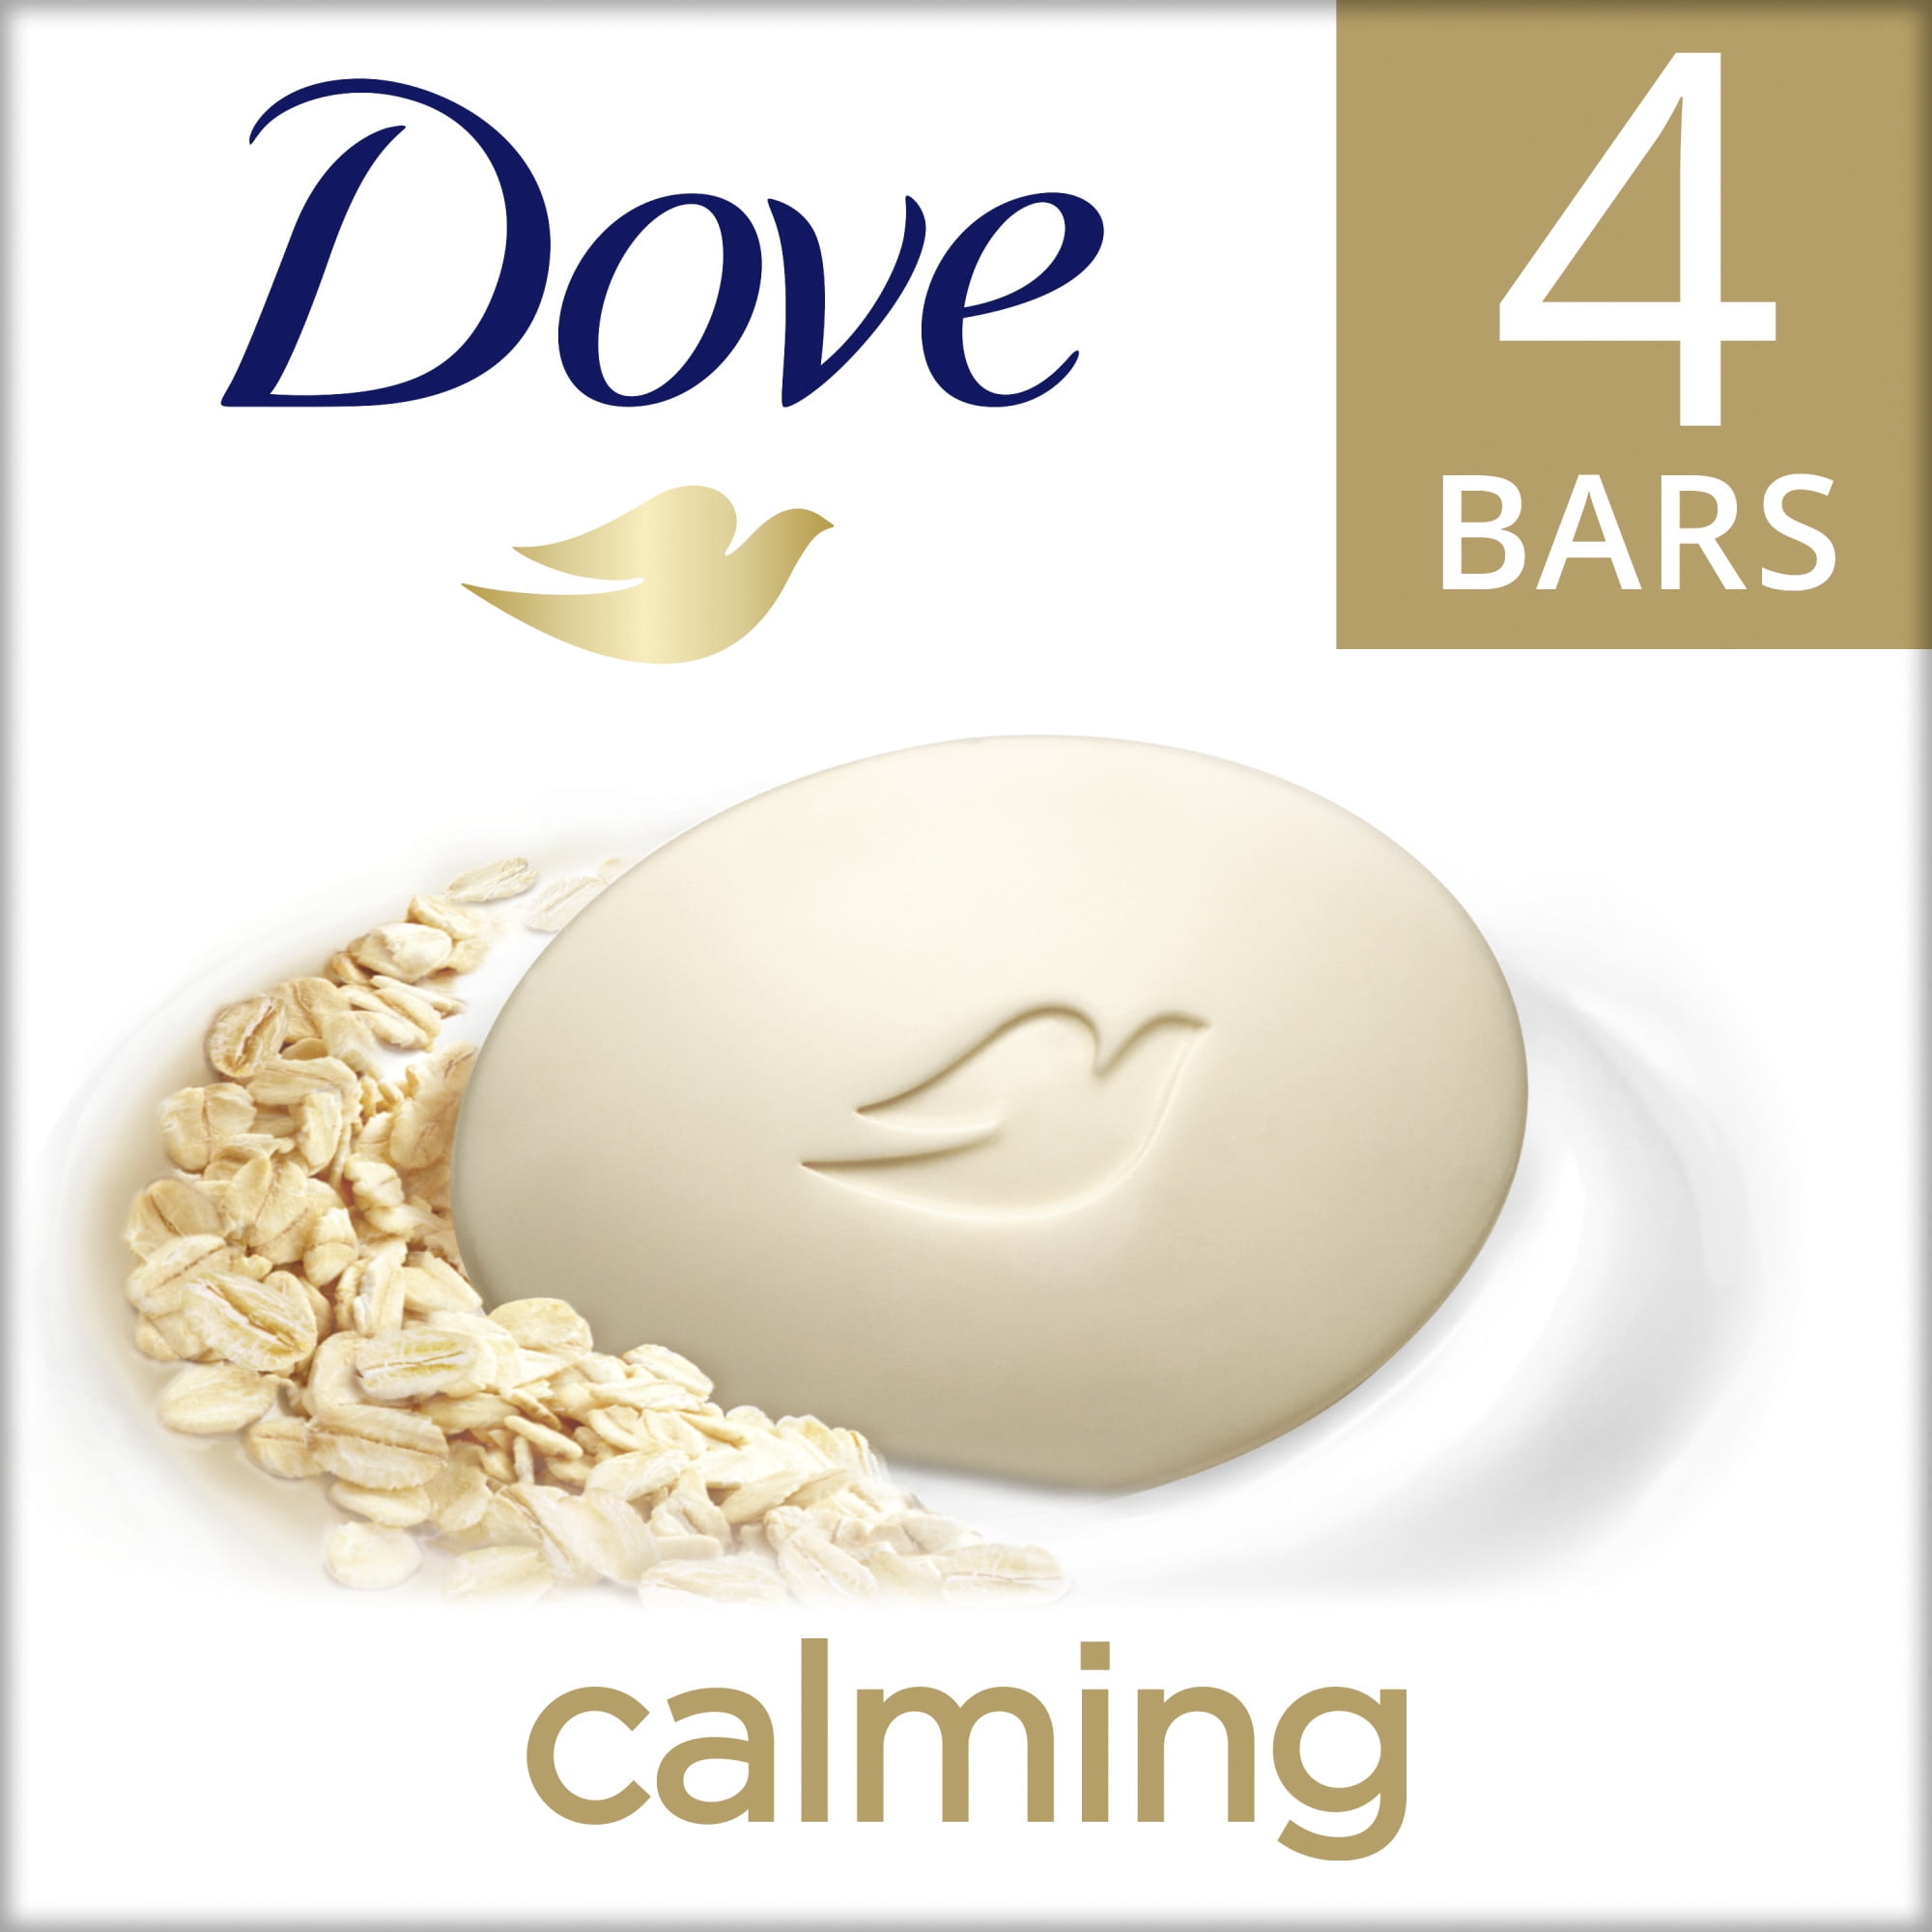 Dove Beauty Bar Calming Oatmeal and Rice Milk Scent, 3.75 Oz., 4 Pack